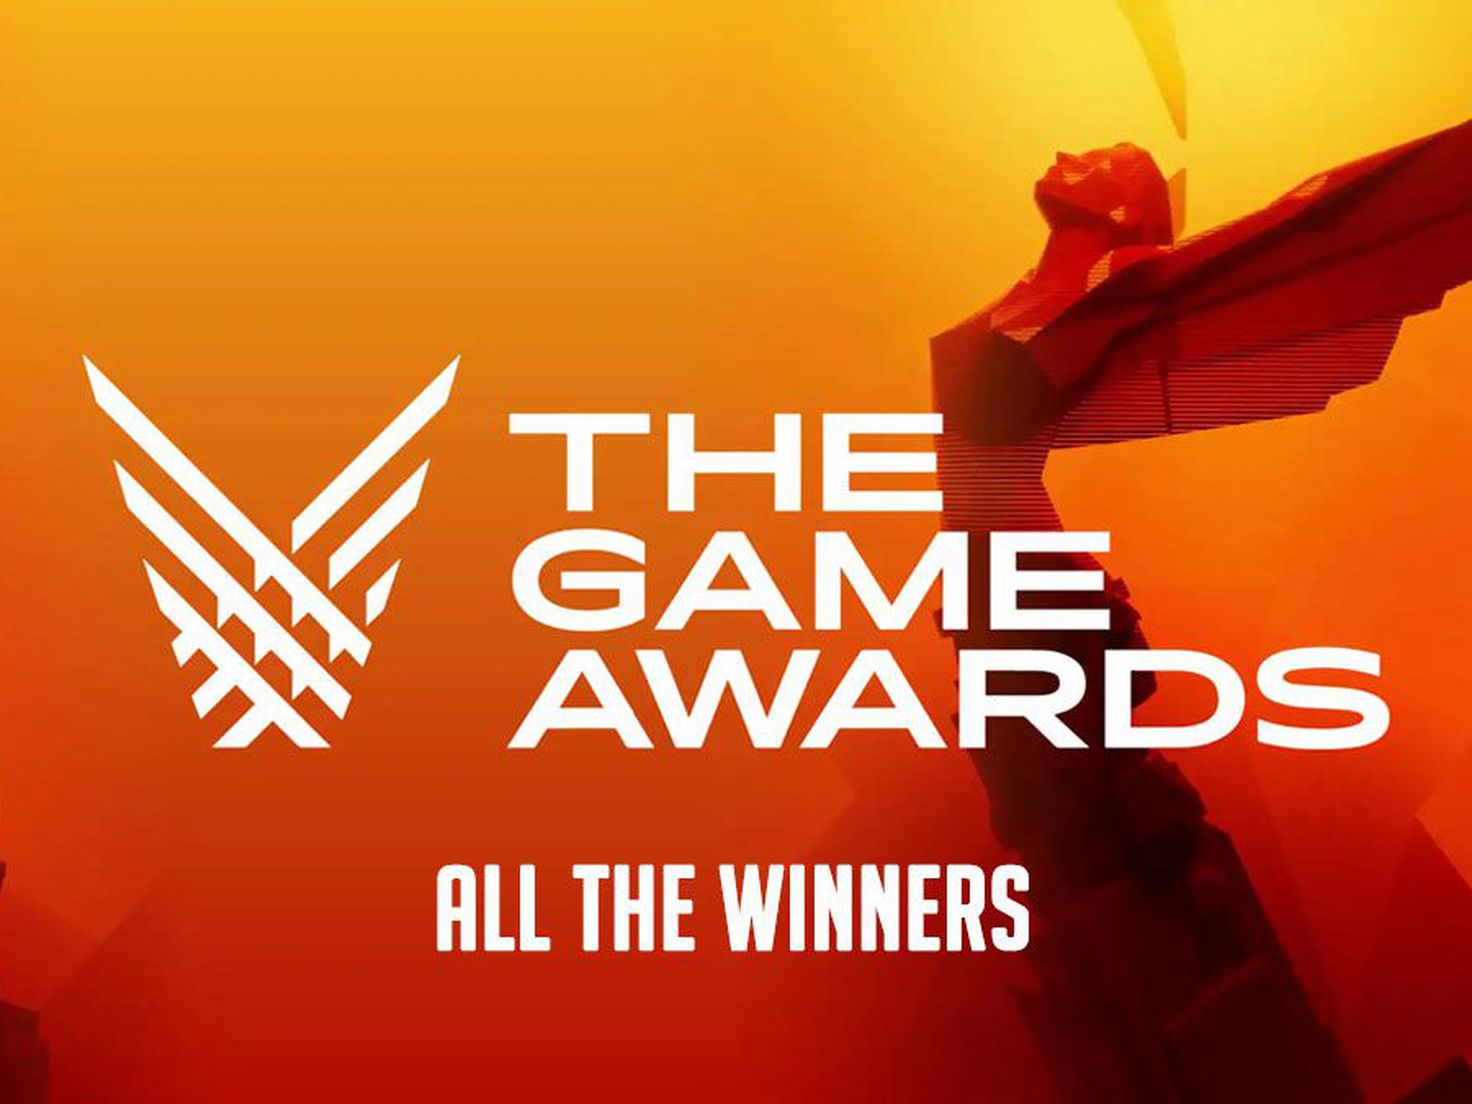 Stray wins Best Debut Indie Game title at The Game Awards 2022